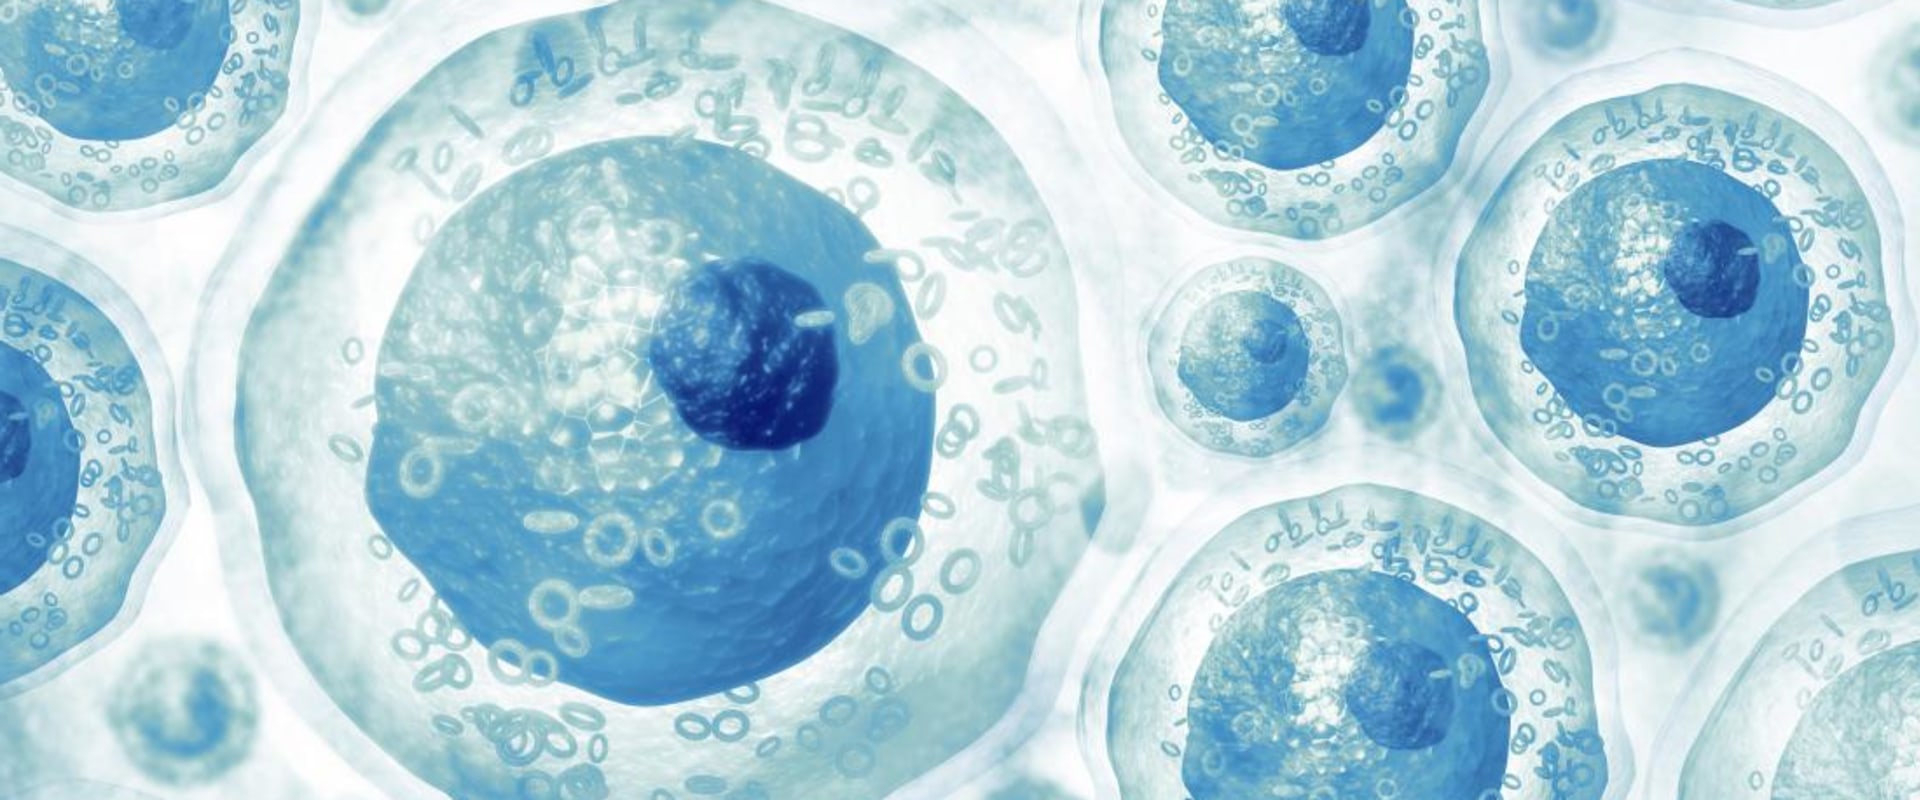 Which types of cells are used for stem cell therapy?